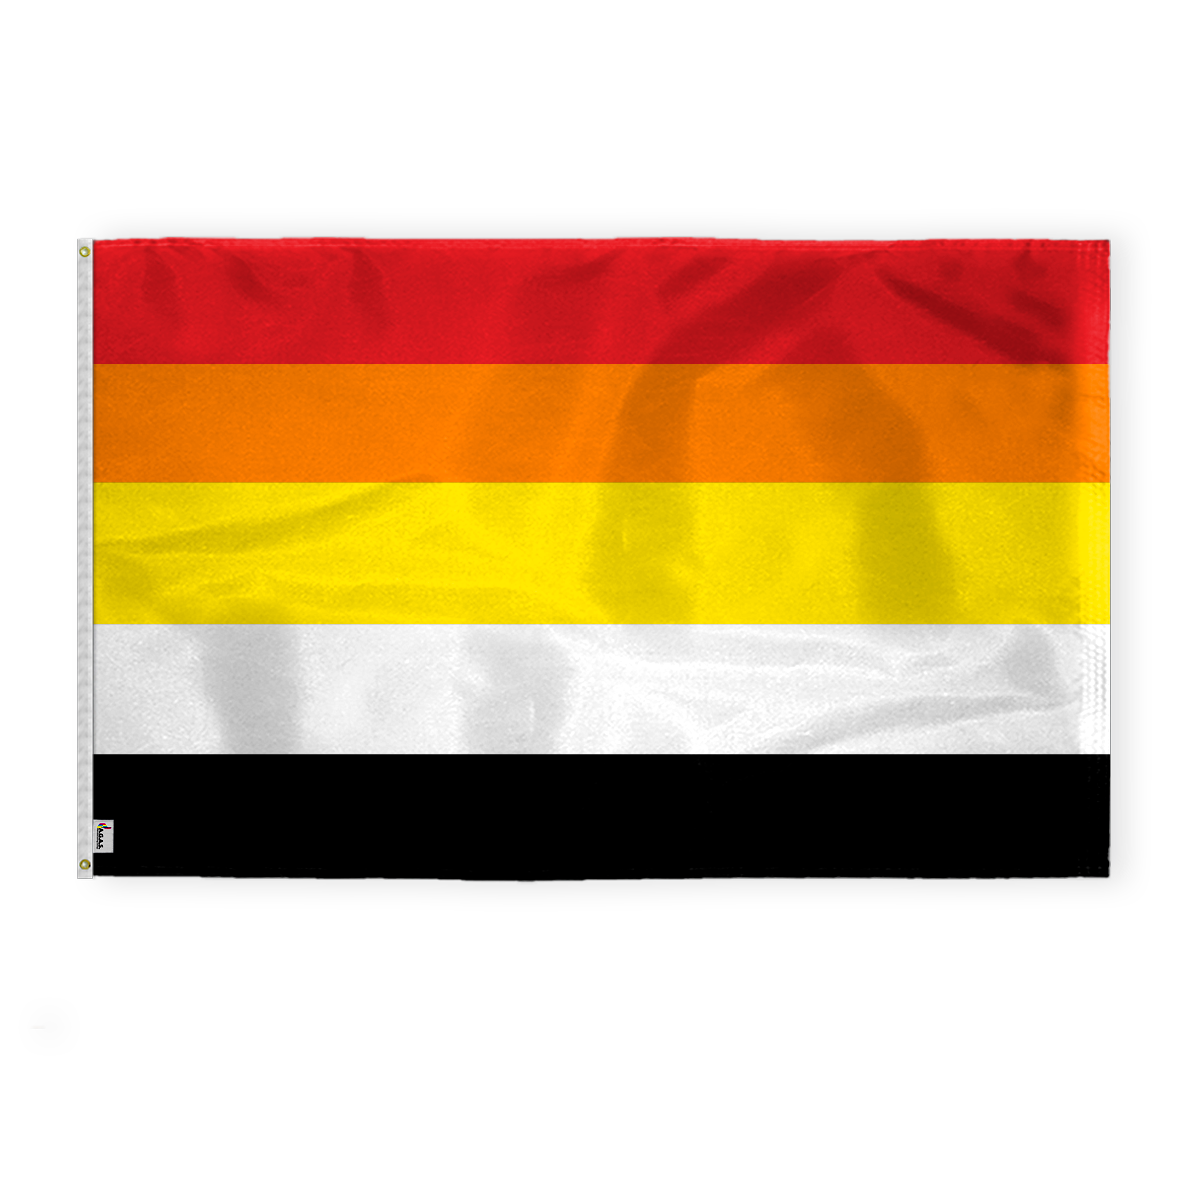 AGAS Lithsexual Pride Flag 4x6 Ft - Double Sided Printed 200D Nylon